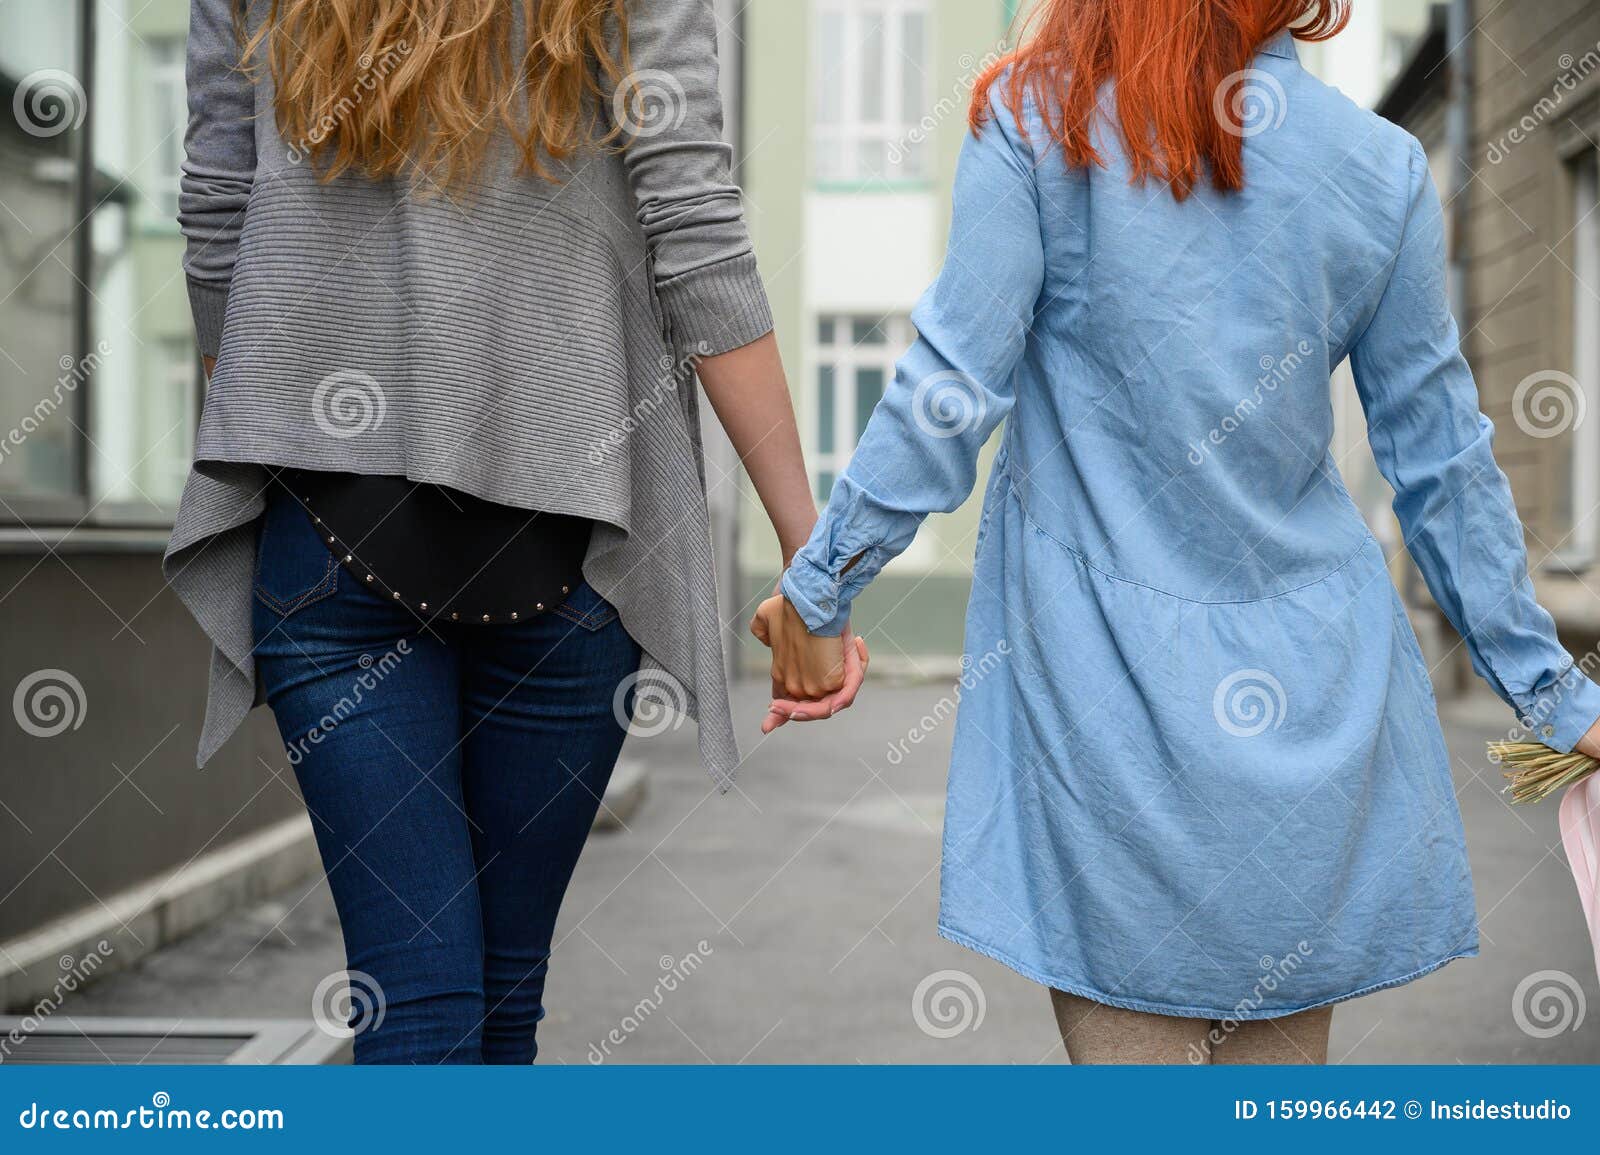 Same Sex Relationships Happy Lesbian Couple Walking Down The Street Holding Hands The Backs Of